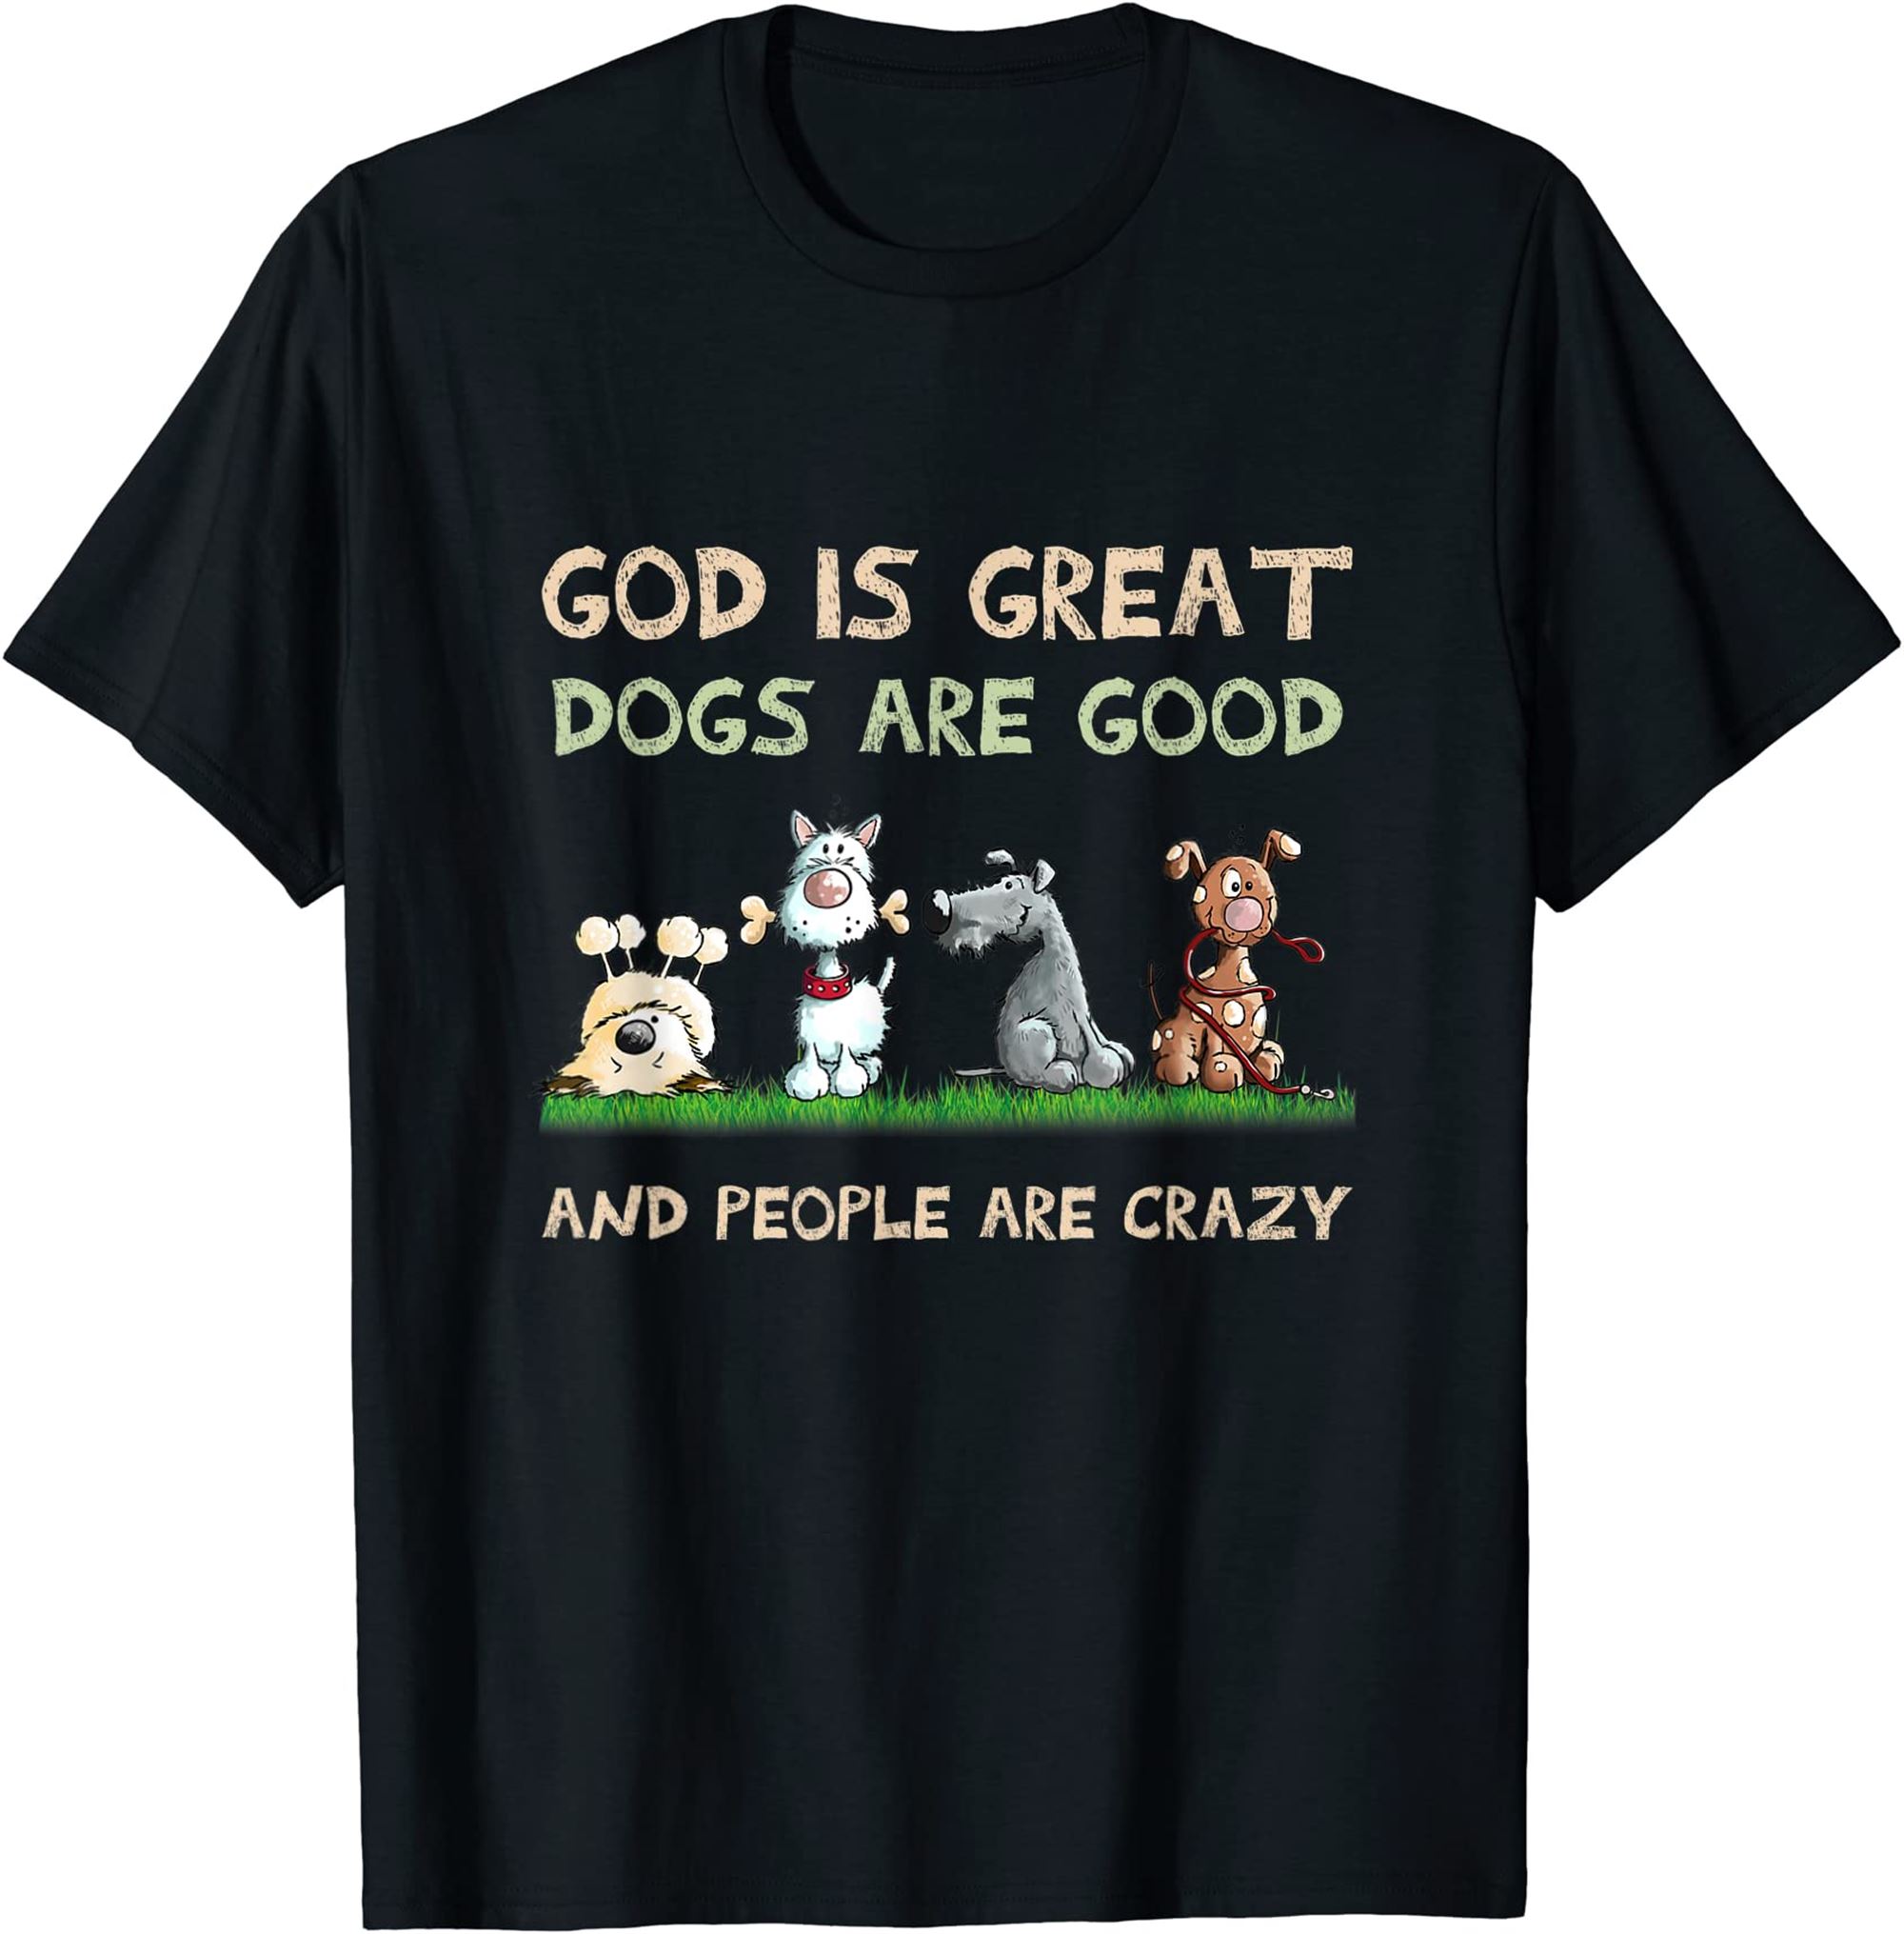 God Is Great Dogs Are Good And People Are Crazy T-shirt Full Size Up To 5xl